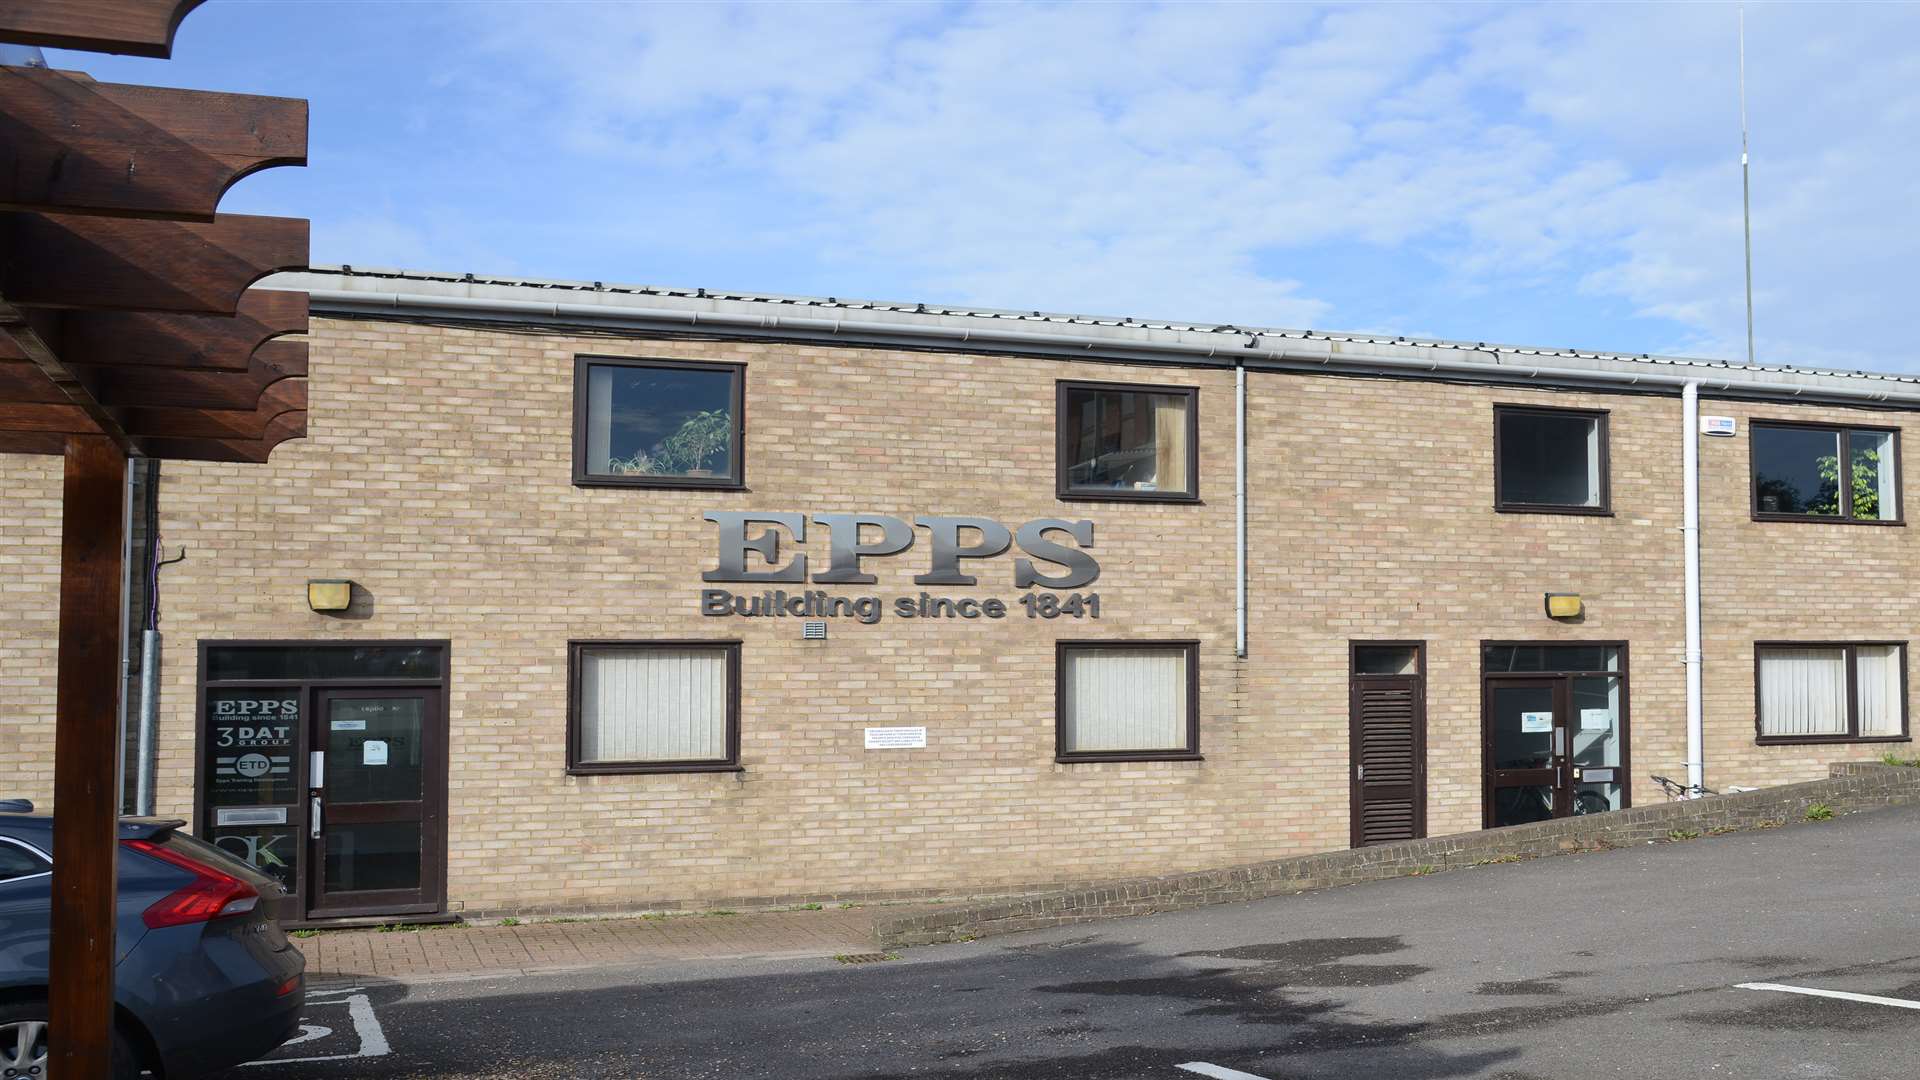 The Epps Construction building in Ashford